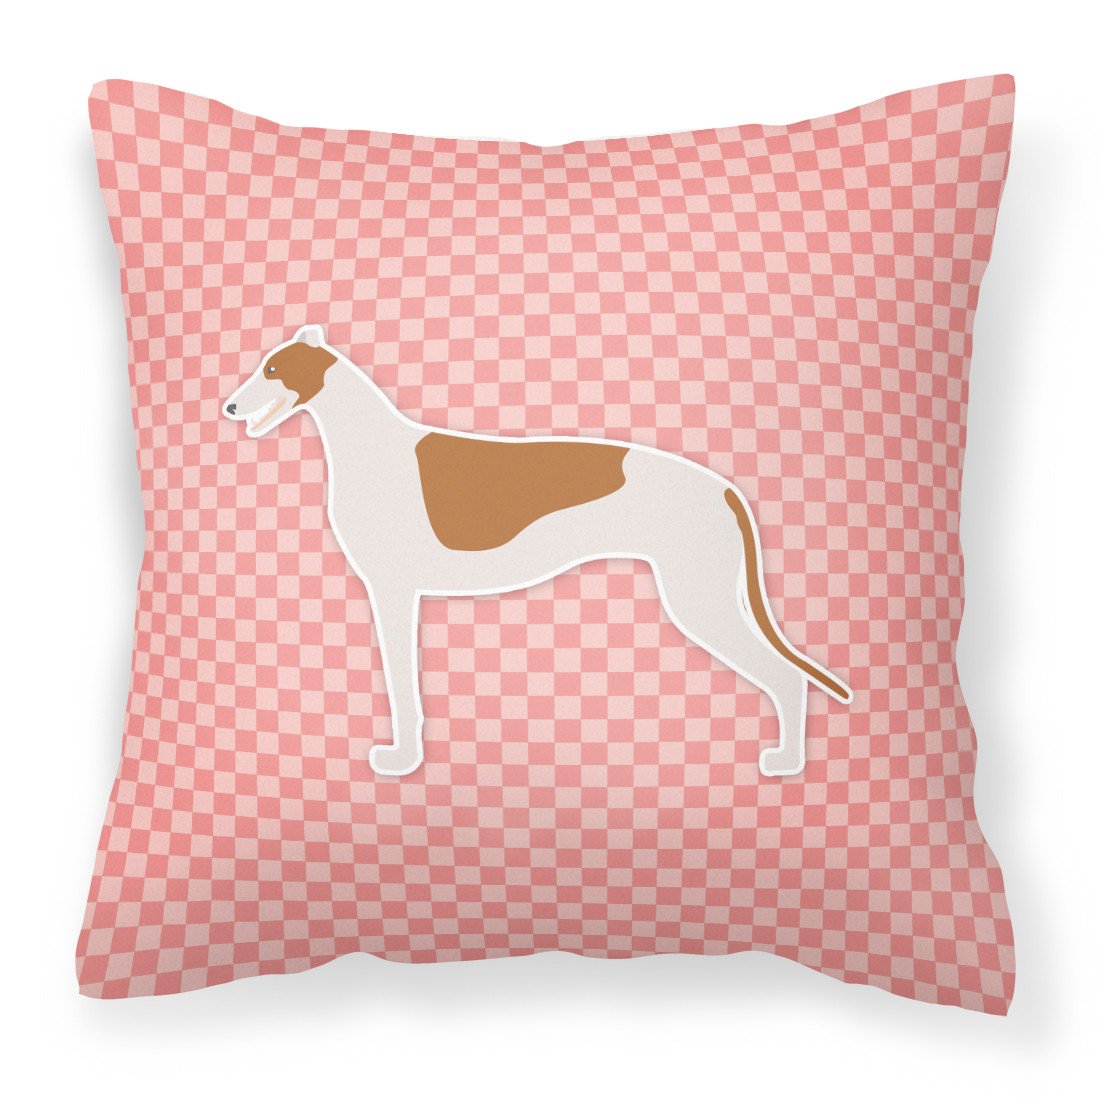 Greyhound Checkerboard Pink Fabric Decorative Pillow BB3605PW1818 by Caroline's Treasures